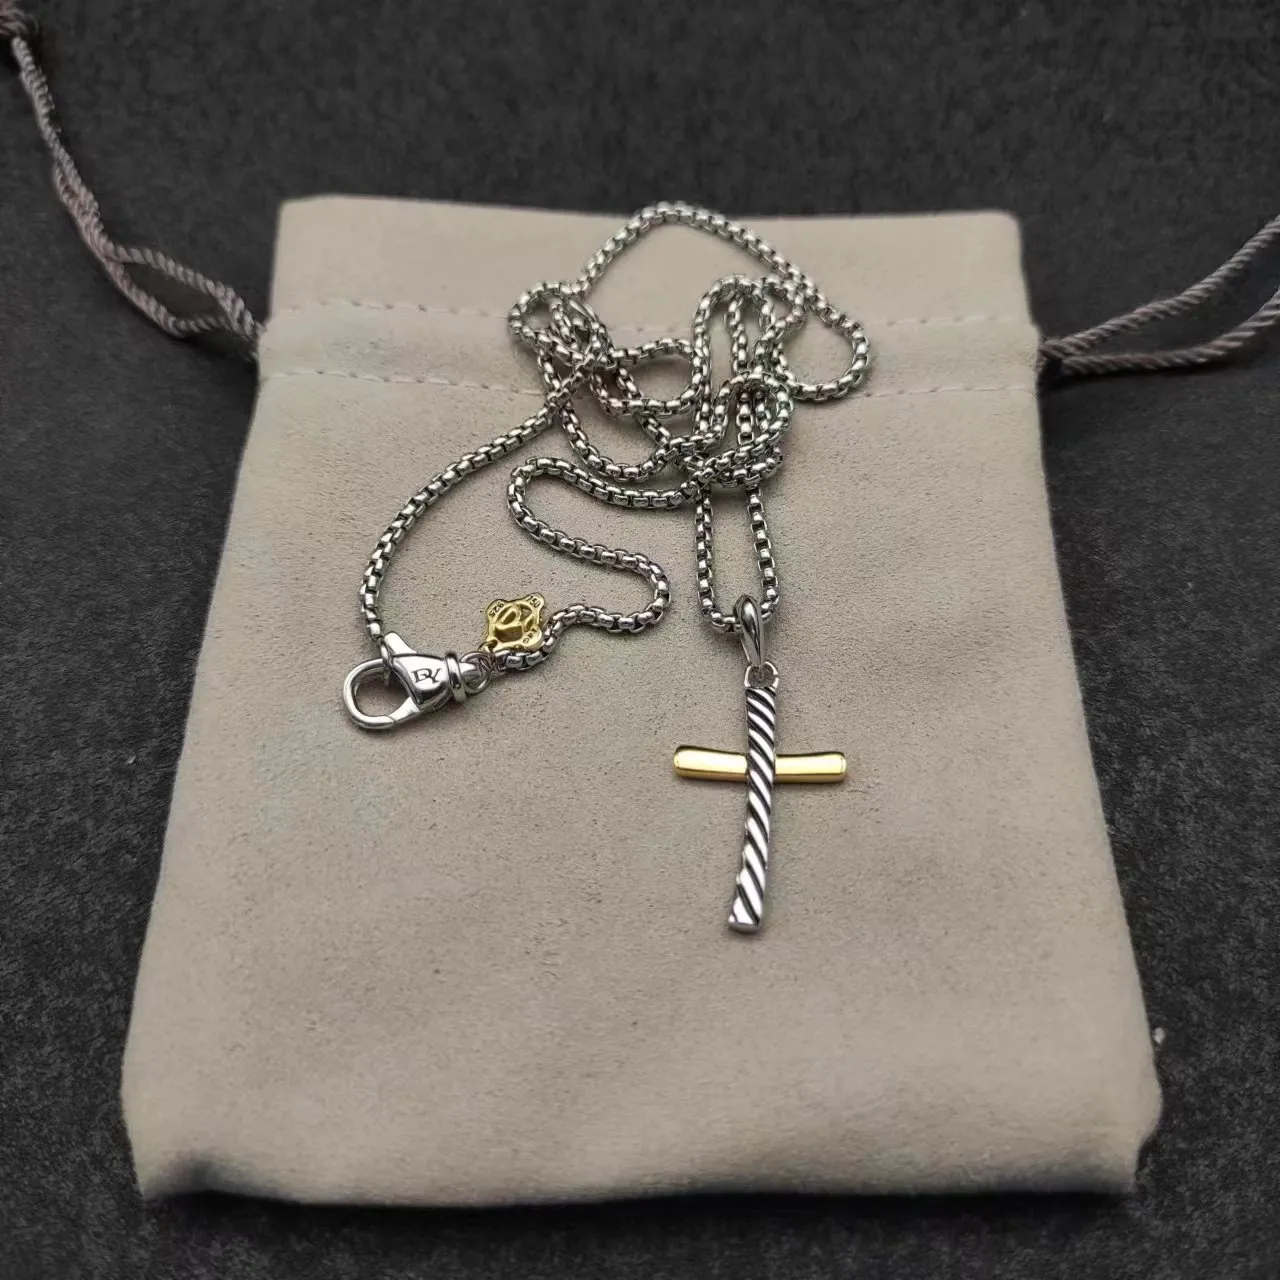 Dy Style Brand High Designer Women's Pendant Necklace Classic Retro Men's Gold and Silver Twisted Cross Square Diamond Necklace Length 50cm Gift Jewelry with Box